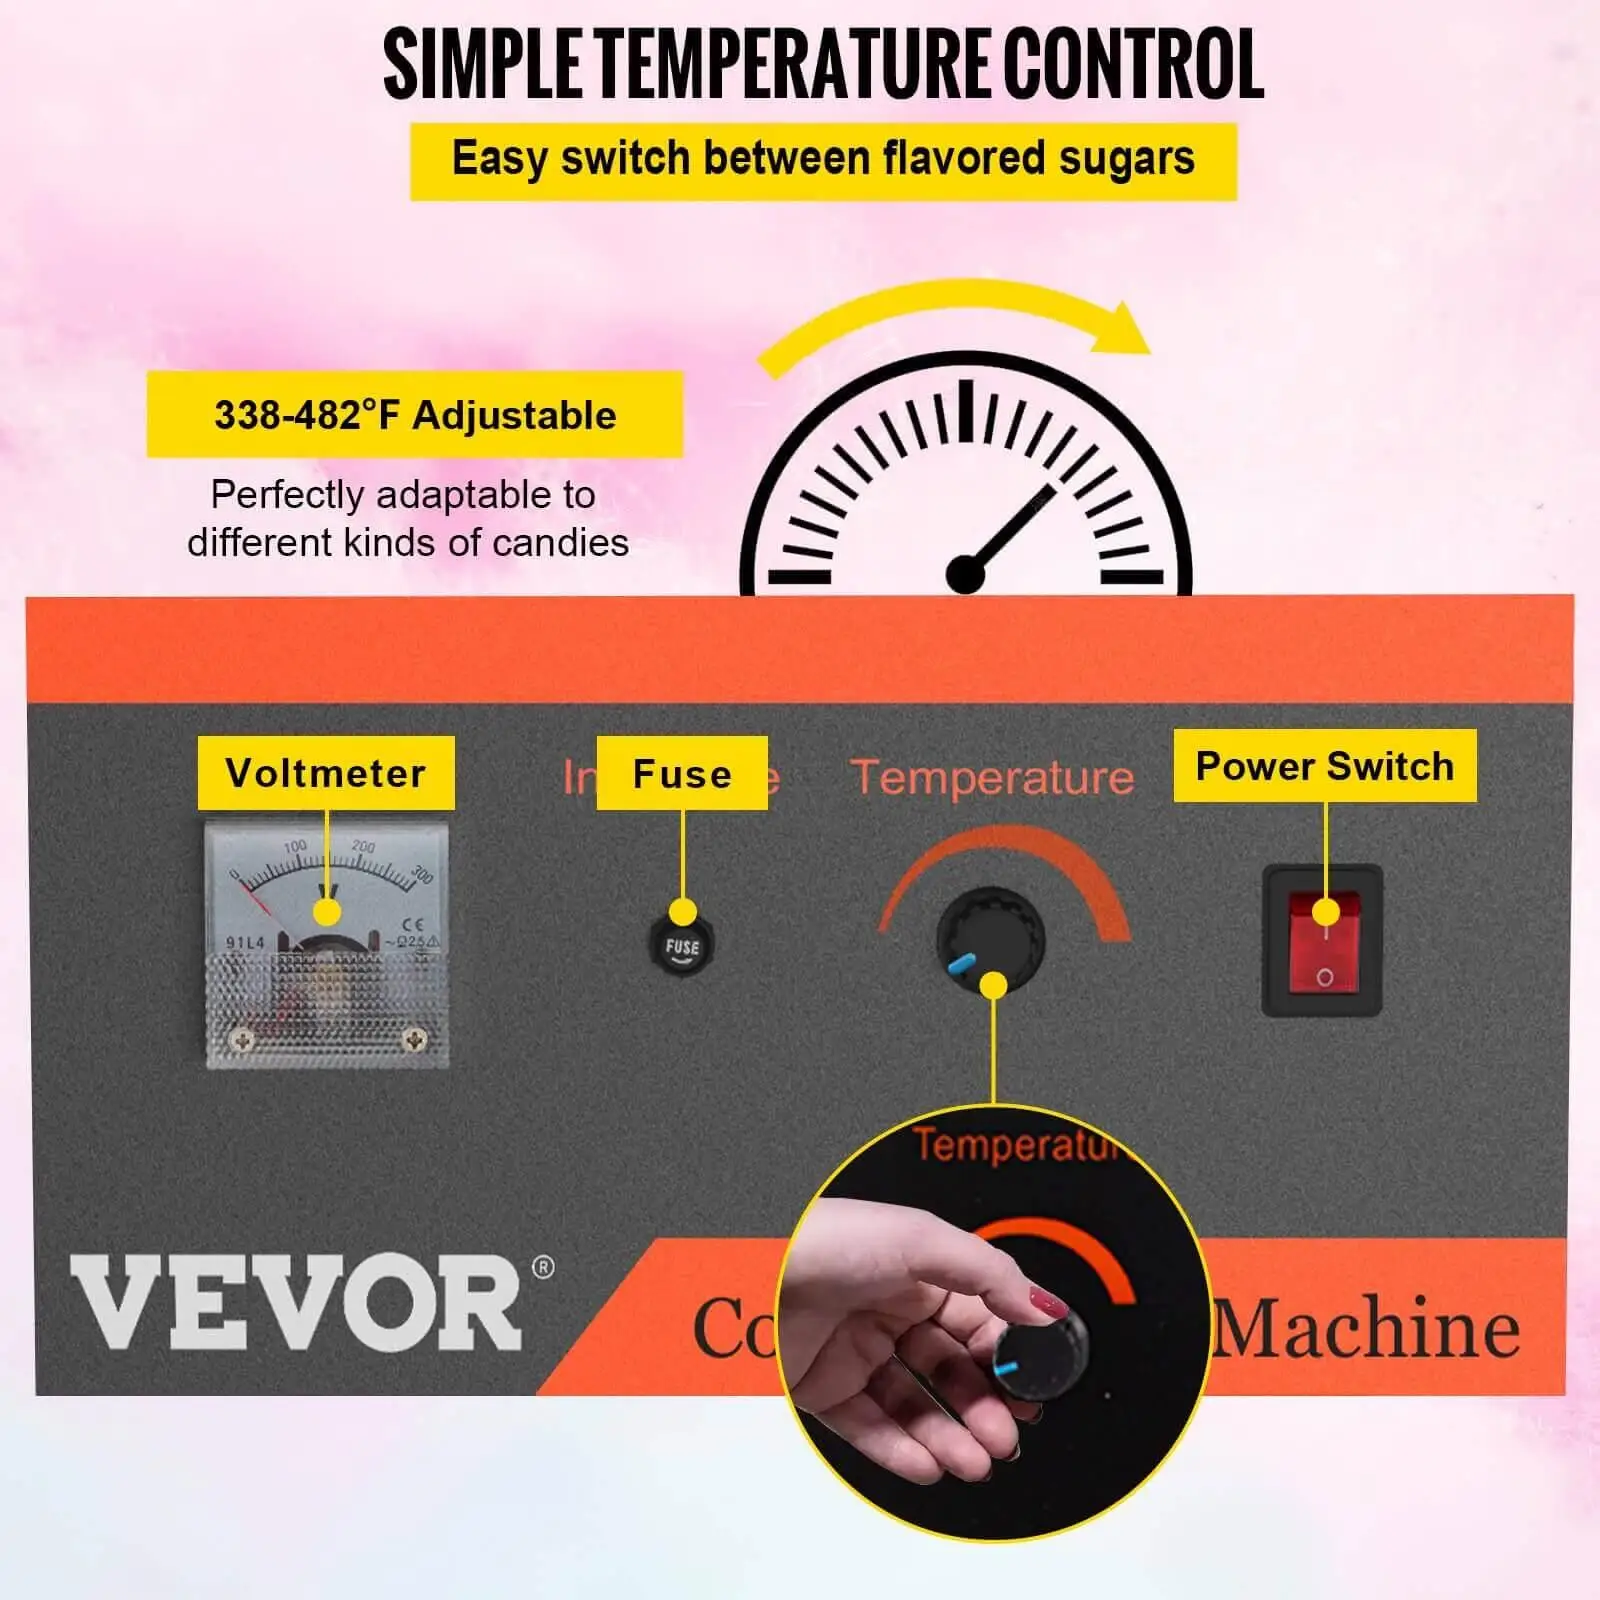 simple temperature control on the VEVOR cotton candy machine